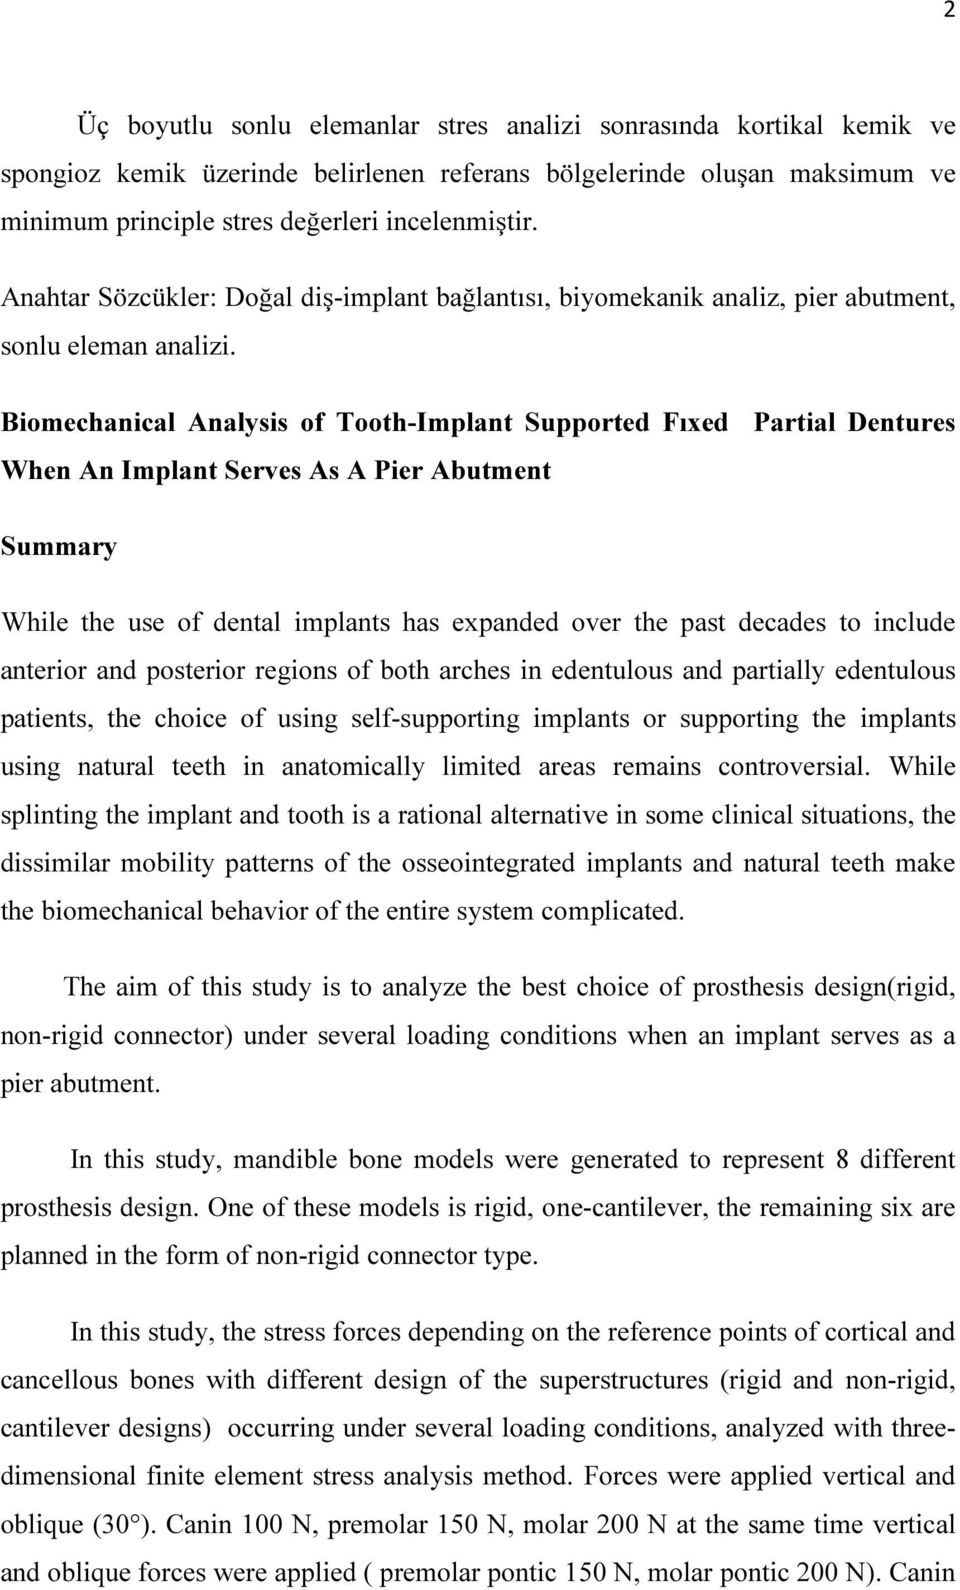 Biomechanical Analysis of Tooth-Implant Supported Fıxed Partial Dentures When An Implant Serves As A Pier Abutment Summary While the use of dental implants has expanded over the past decades to